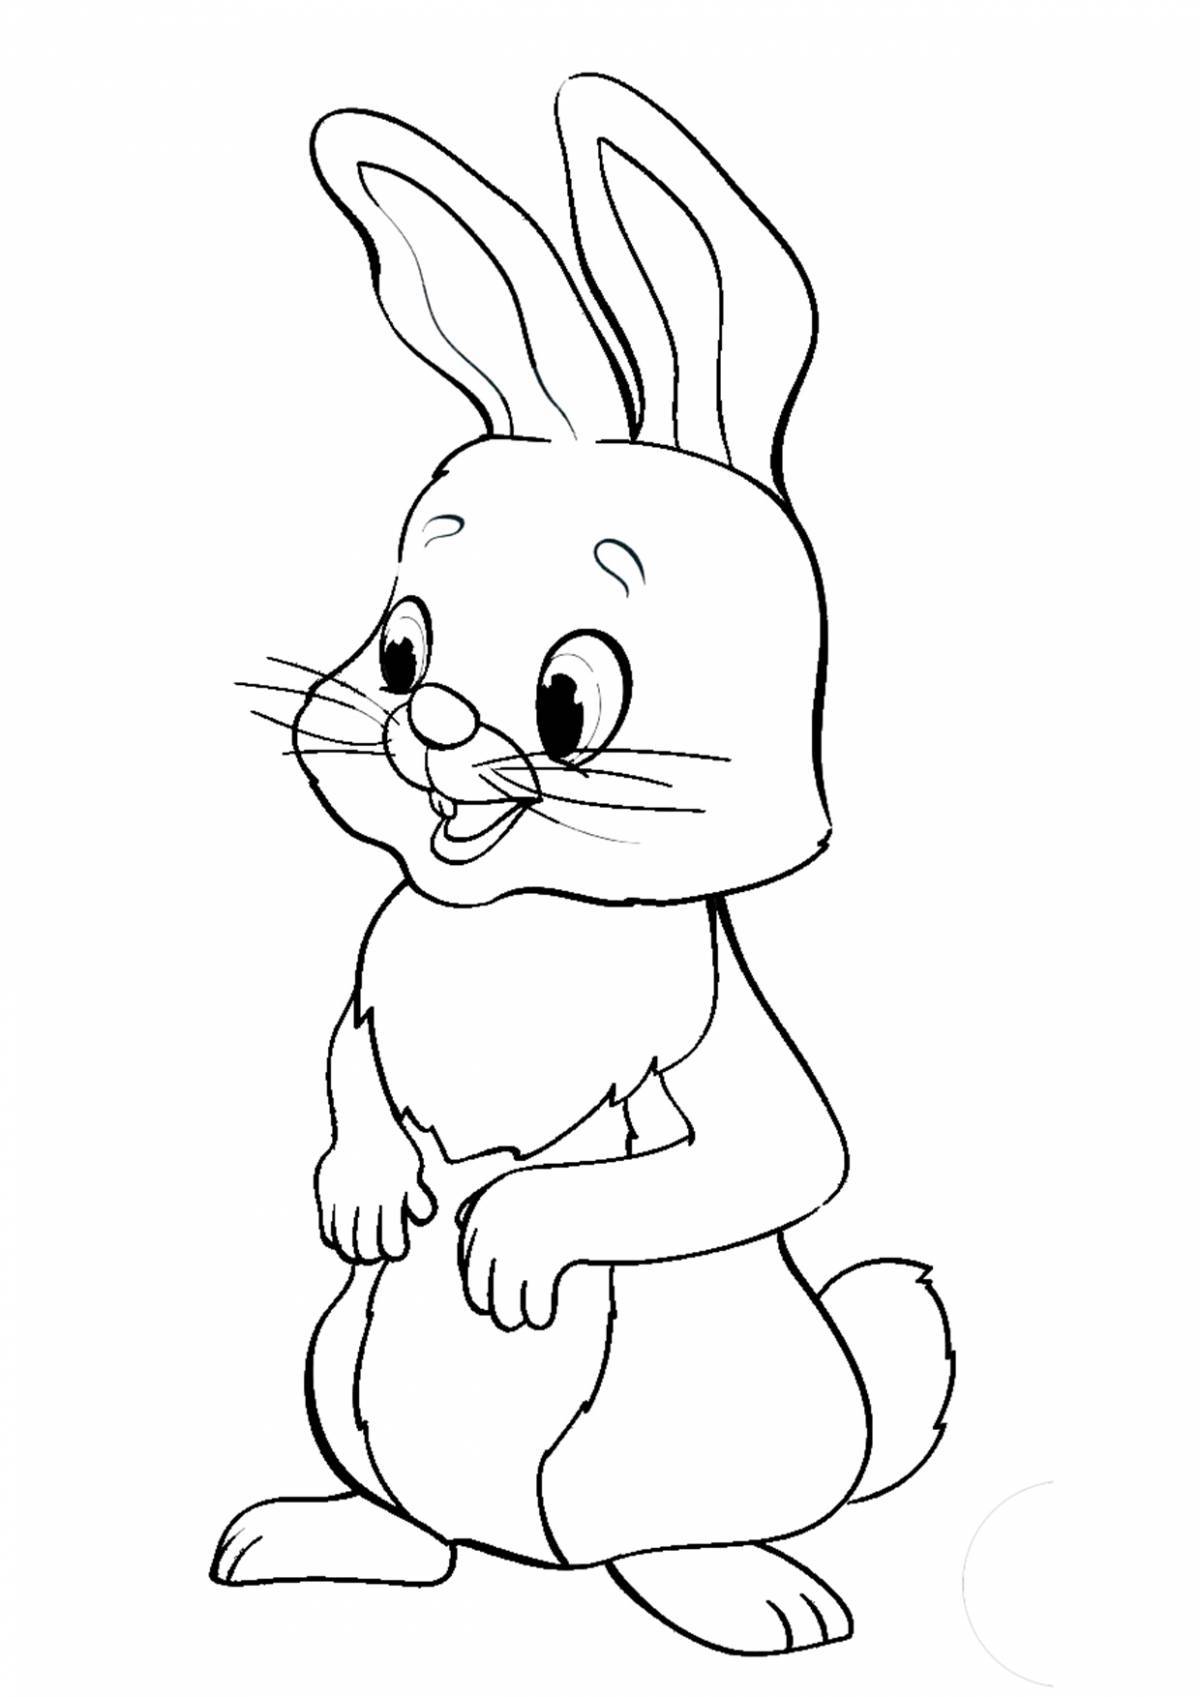 Adorable hare coloring book for children 3-4 years old